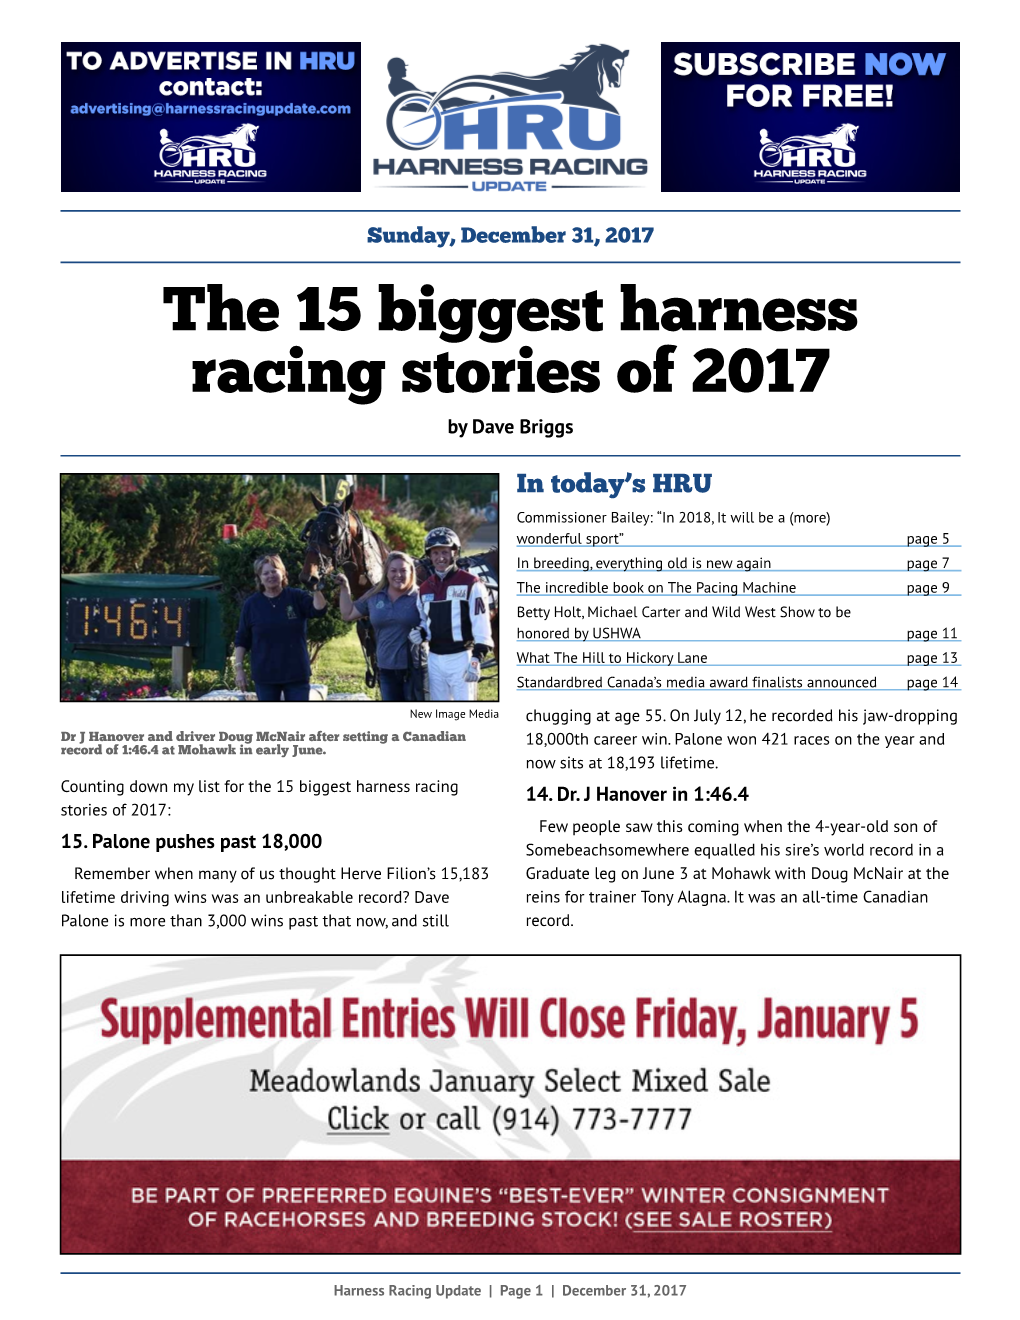 The 15 Biggest Harness Racing Stories of 2017 by Dave Briggs